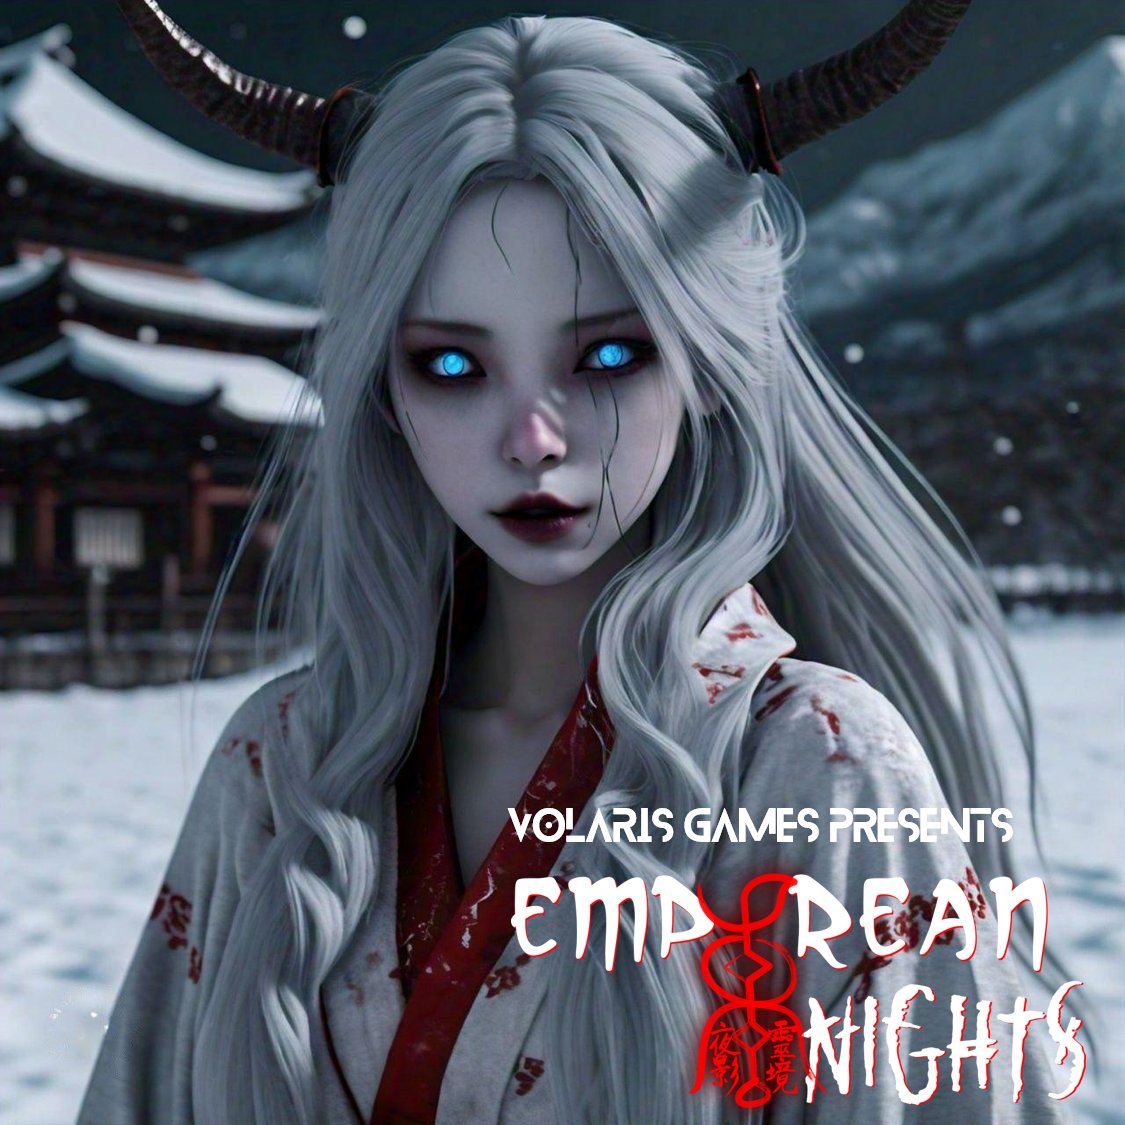 Amidst the snowy veil, a winter spirit awakens... Her ethereal beauty belies a heart of ice, and a touch that freezes the soul. Those who dare to venture into the frozen night may find themselves ensnared by her chilling embrace... #EmpyreanNights #Web3Gaming